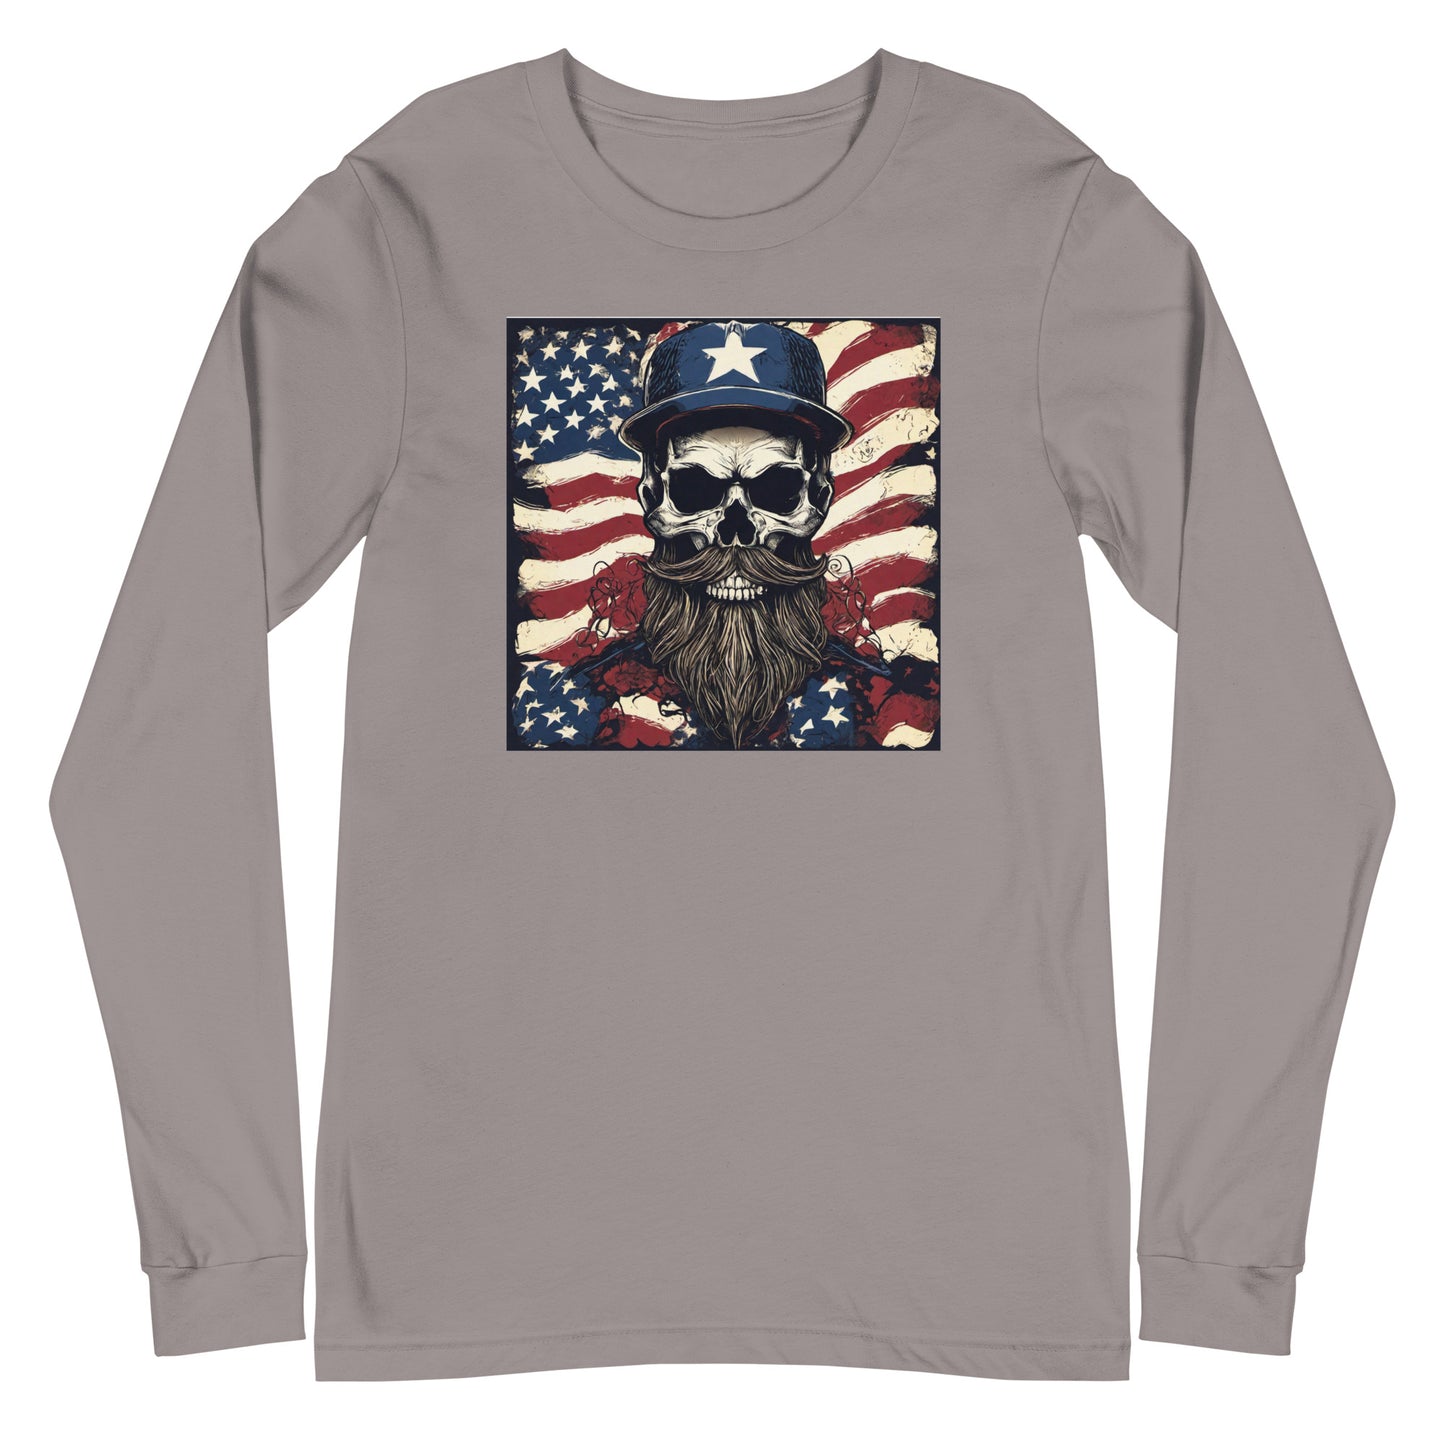 Handsome American Reaper Long Sleeve Graphic Tee Storm